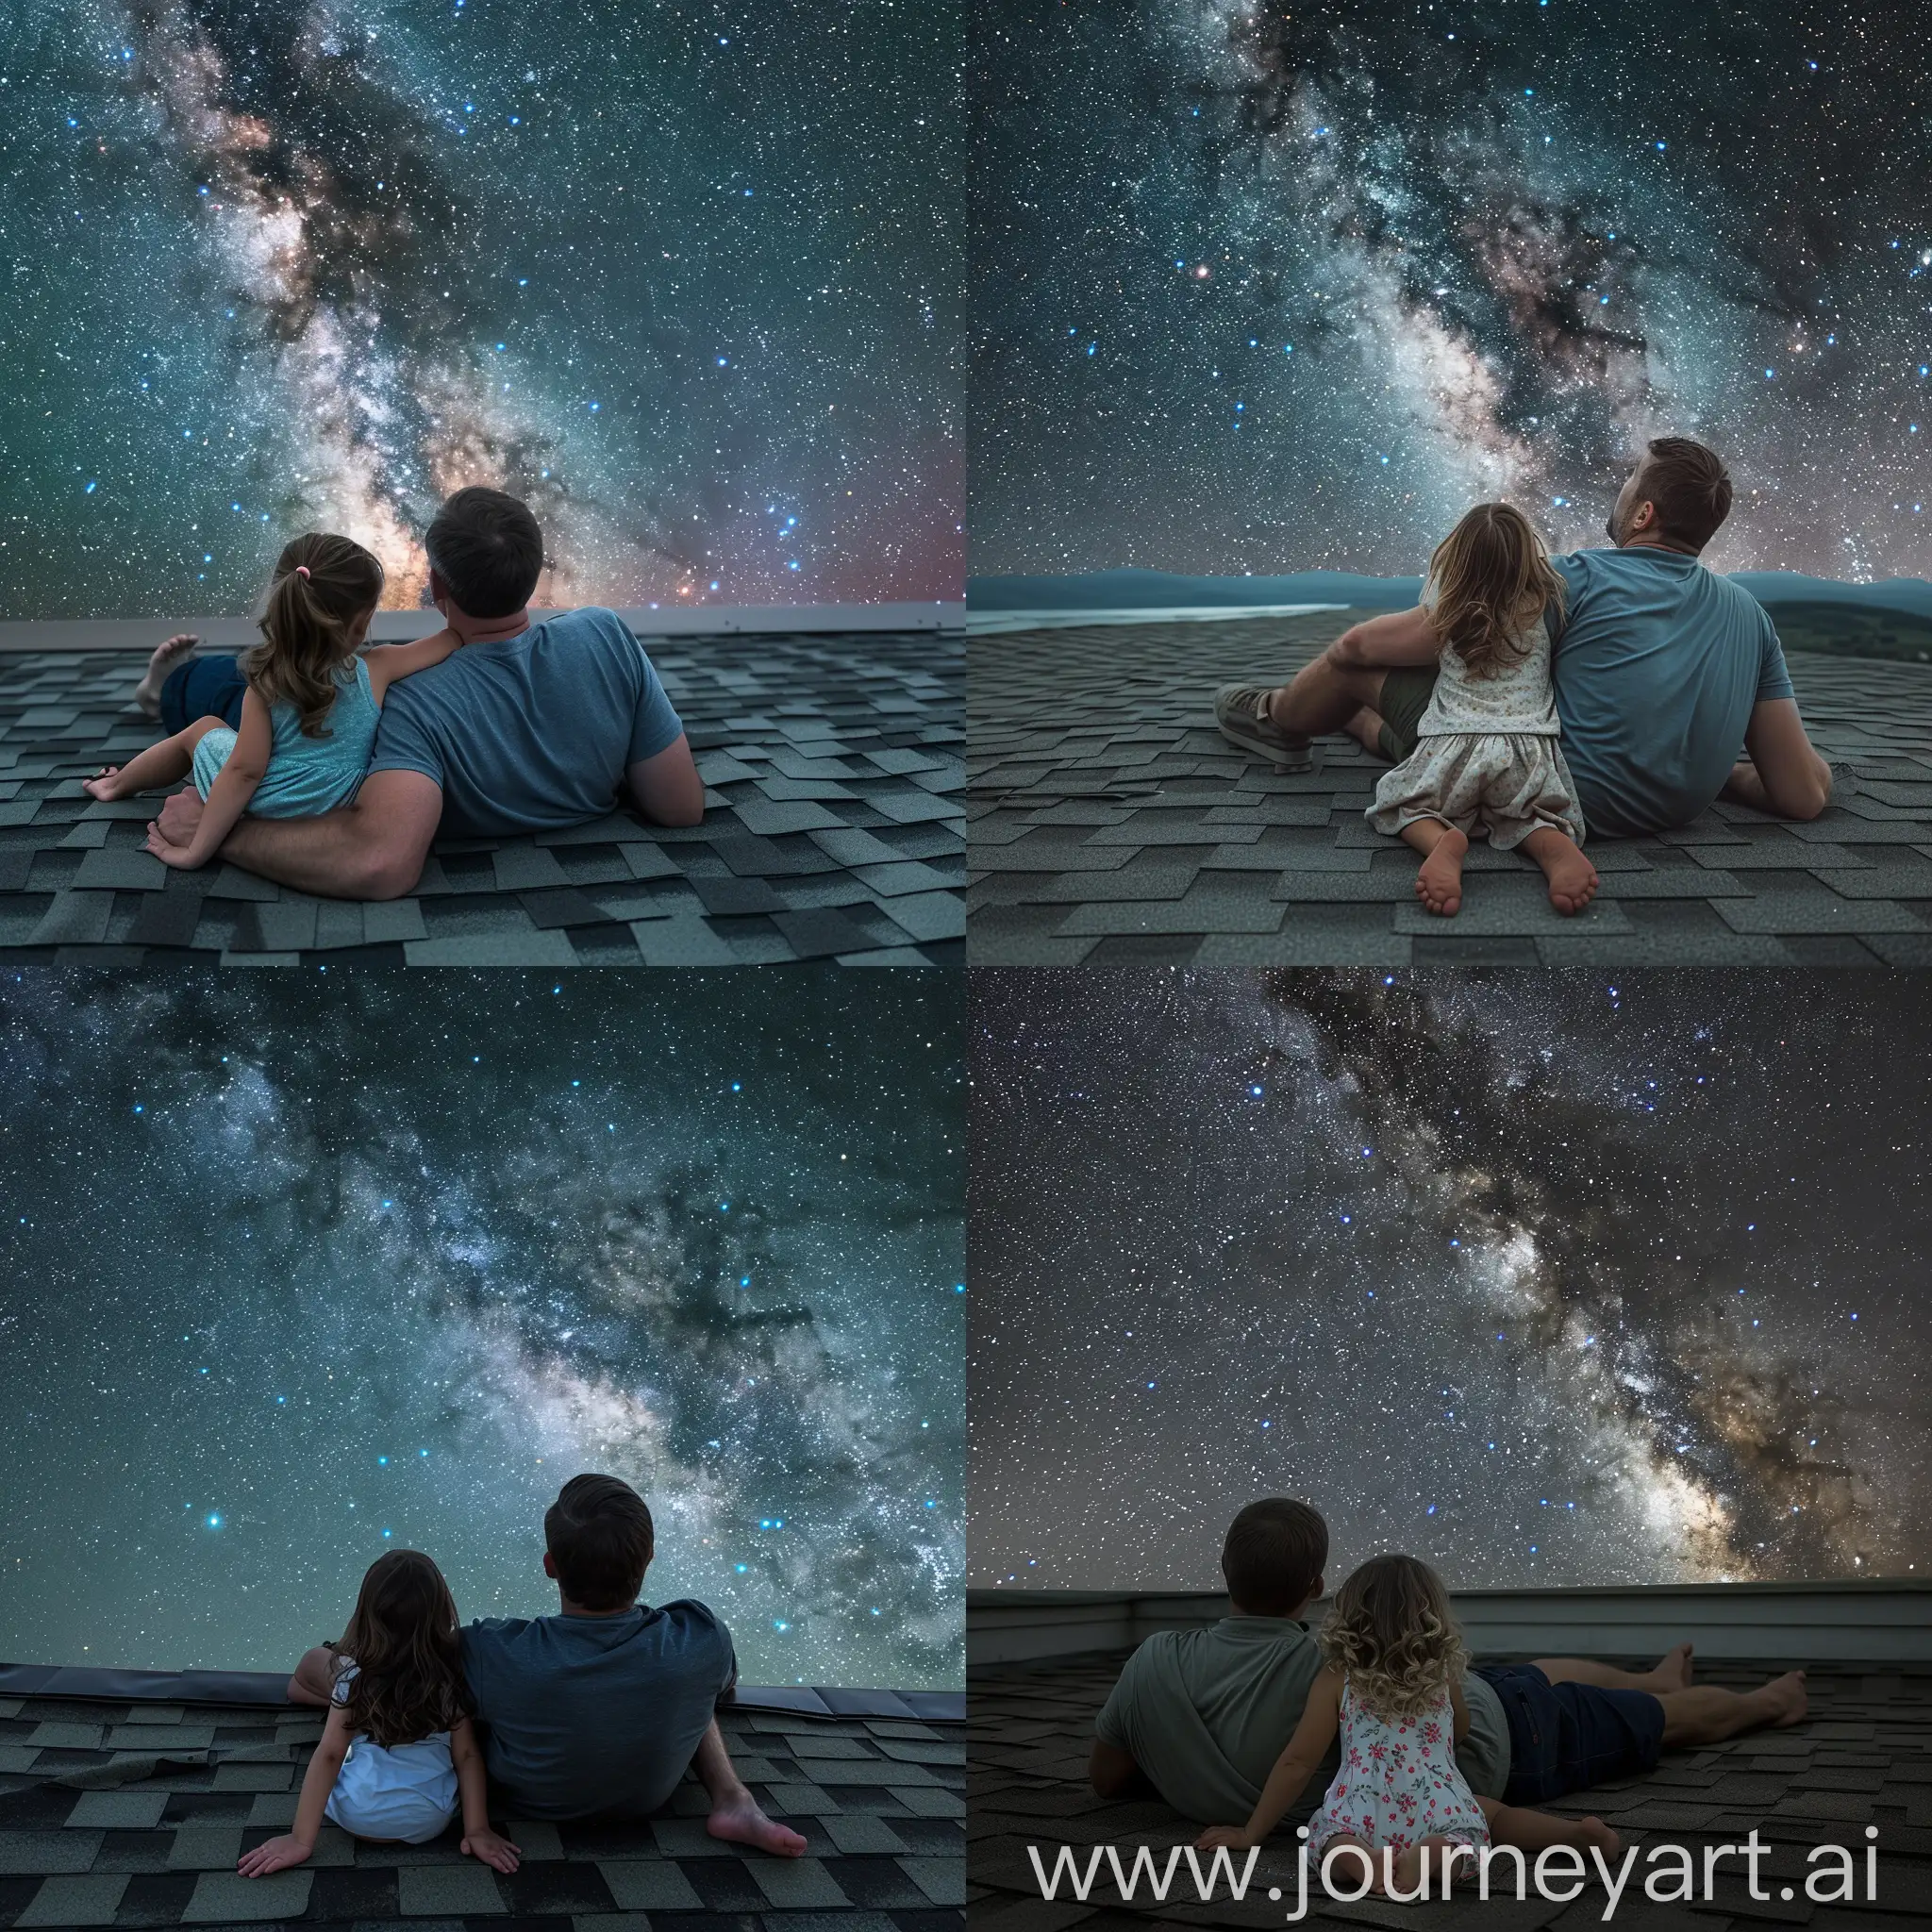 Father-and-Daughter-Stargazing-on-Roof-under-Countless-Stars-and-Milky-Way